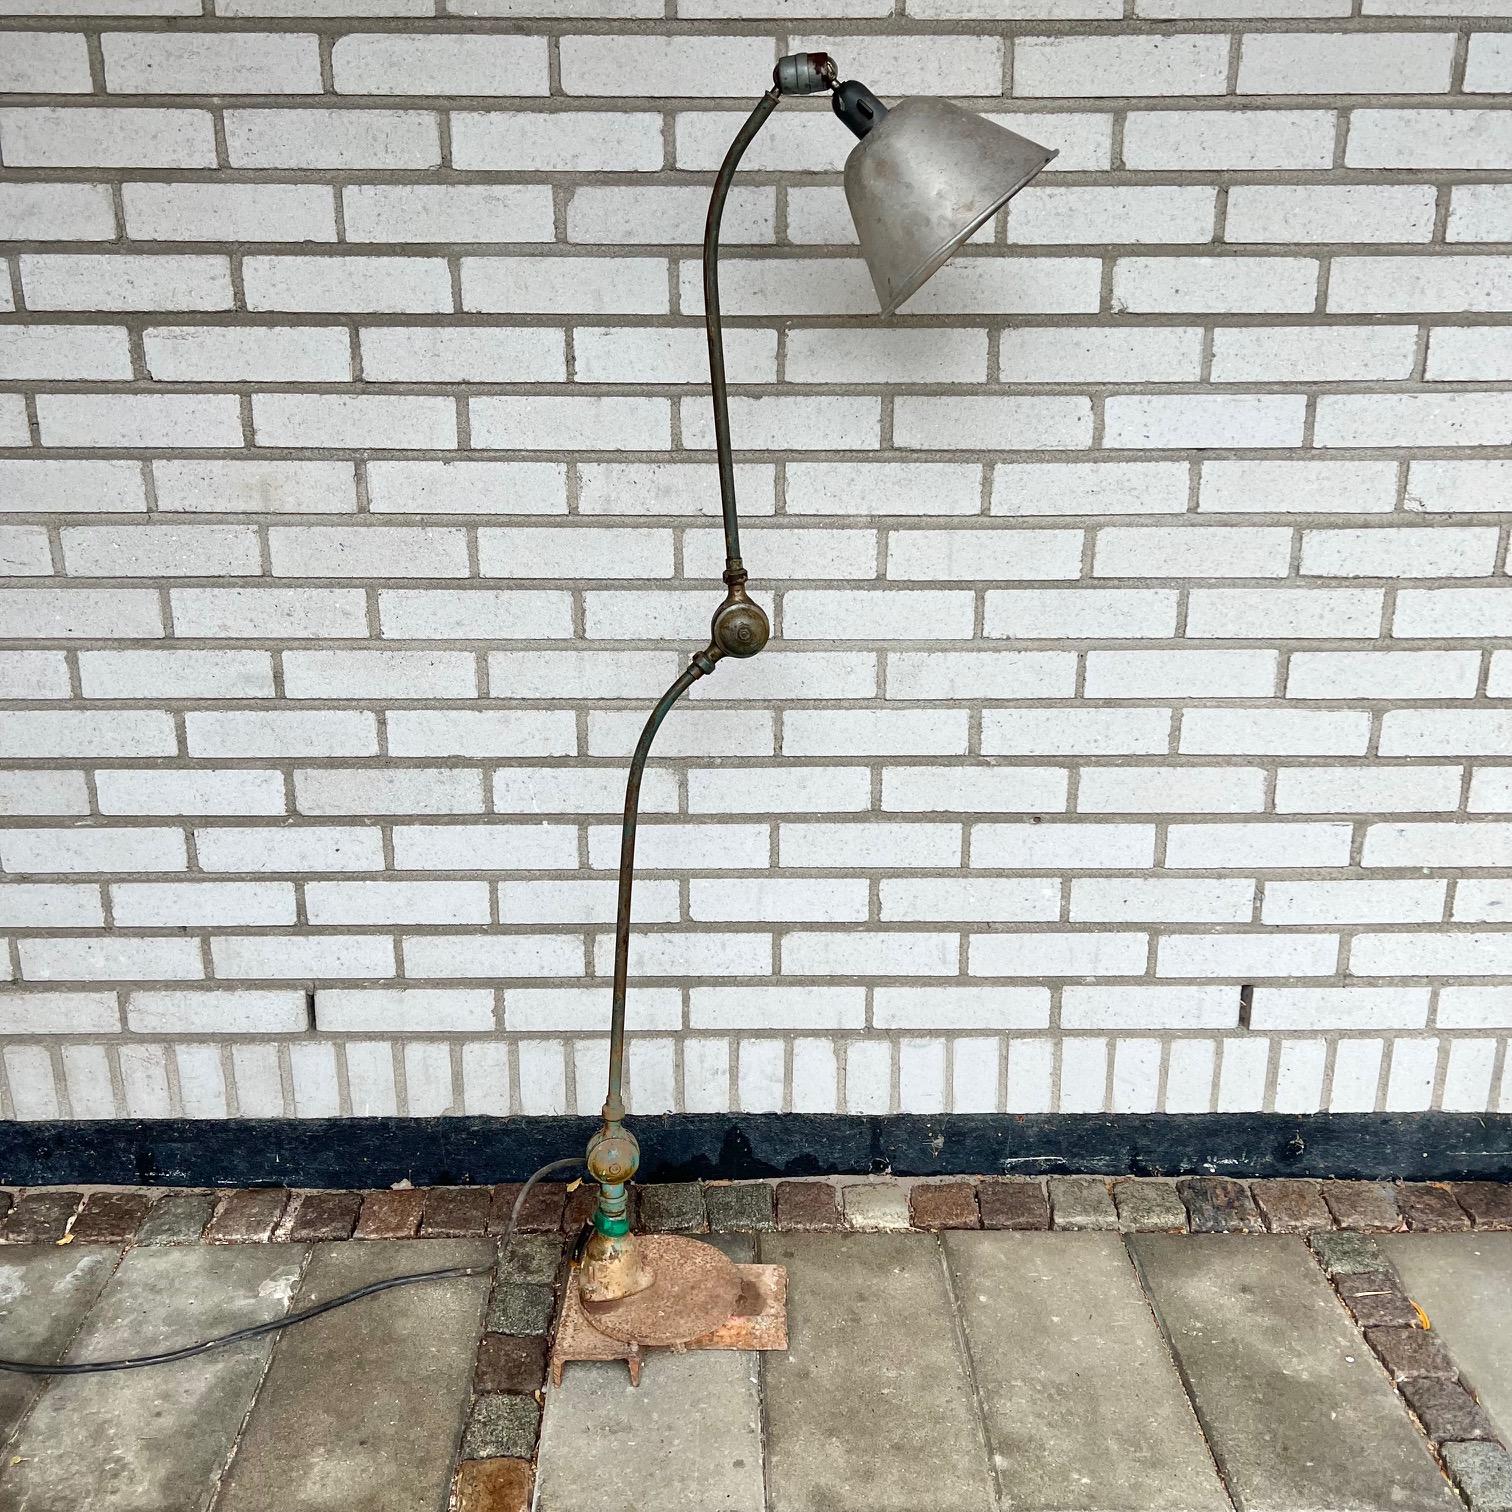 Wall/desk/celing lamp designed by Johan Petter Johansson.
Manufactured by Triplex (Sweden), circa 1930-40s
Made of aluminium and steel.

In good original condition with beautiful patina.